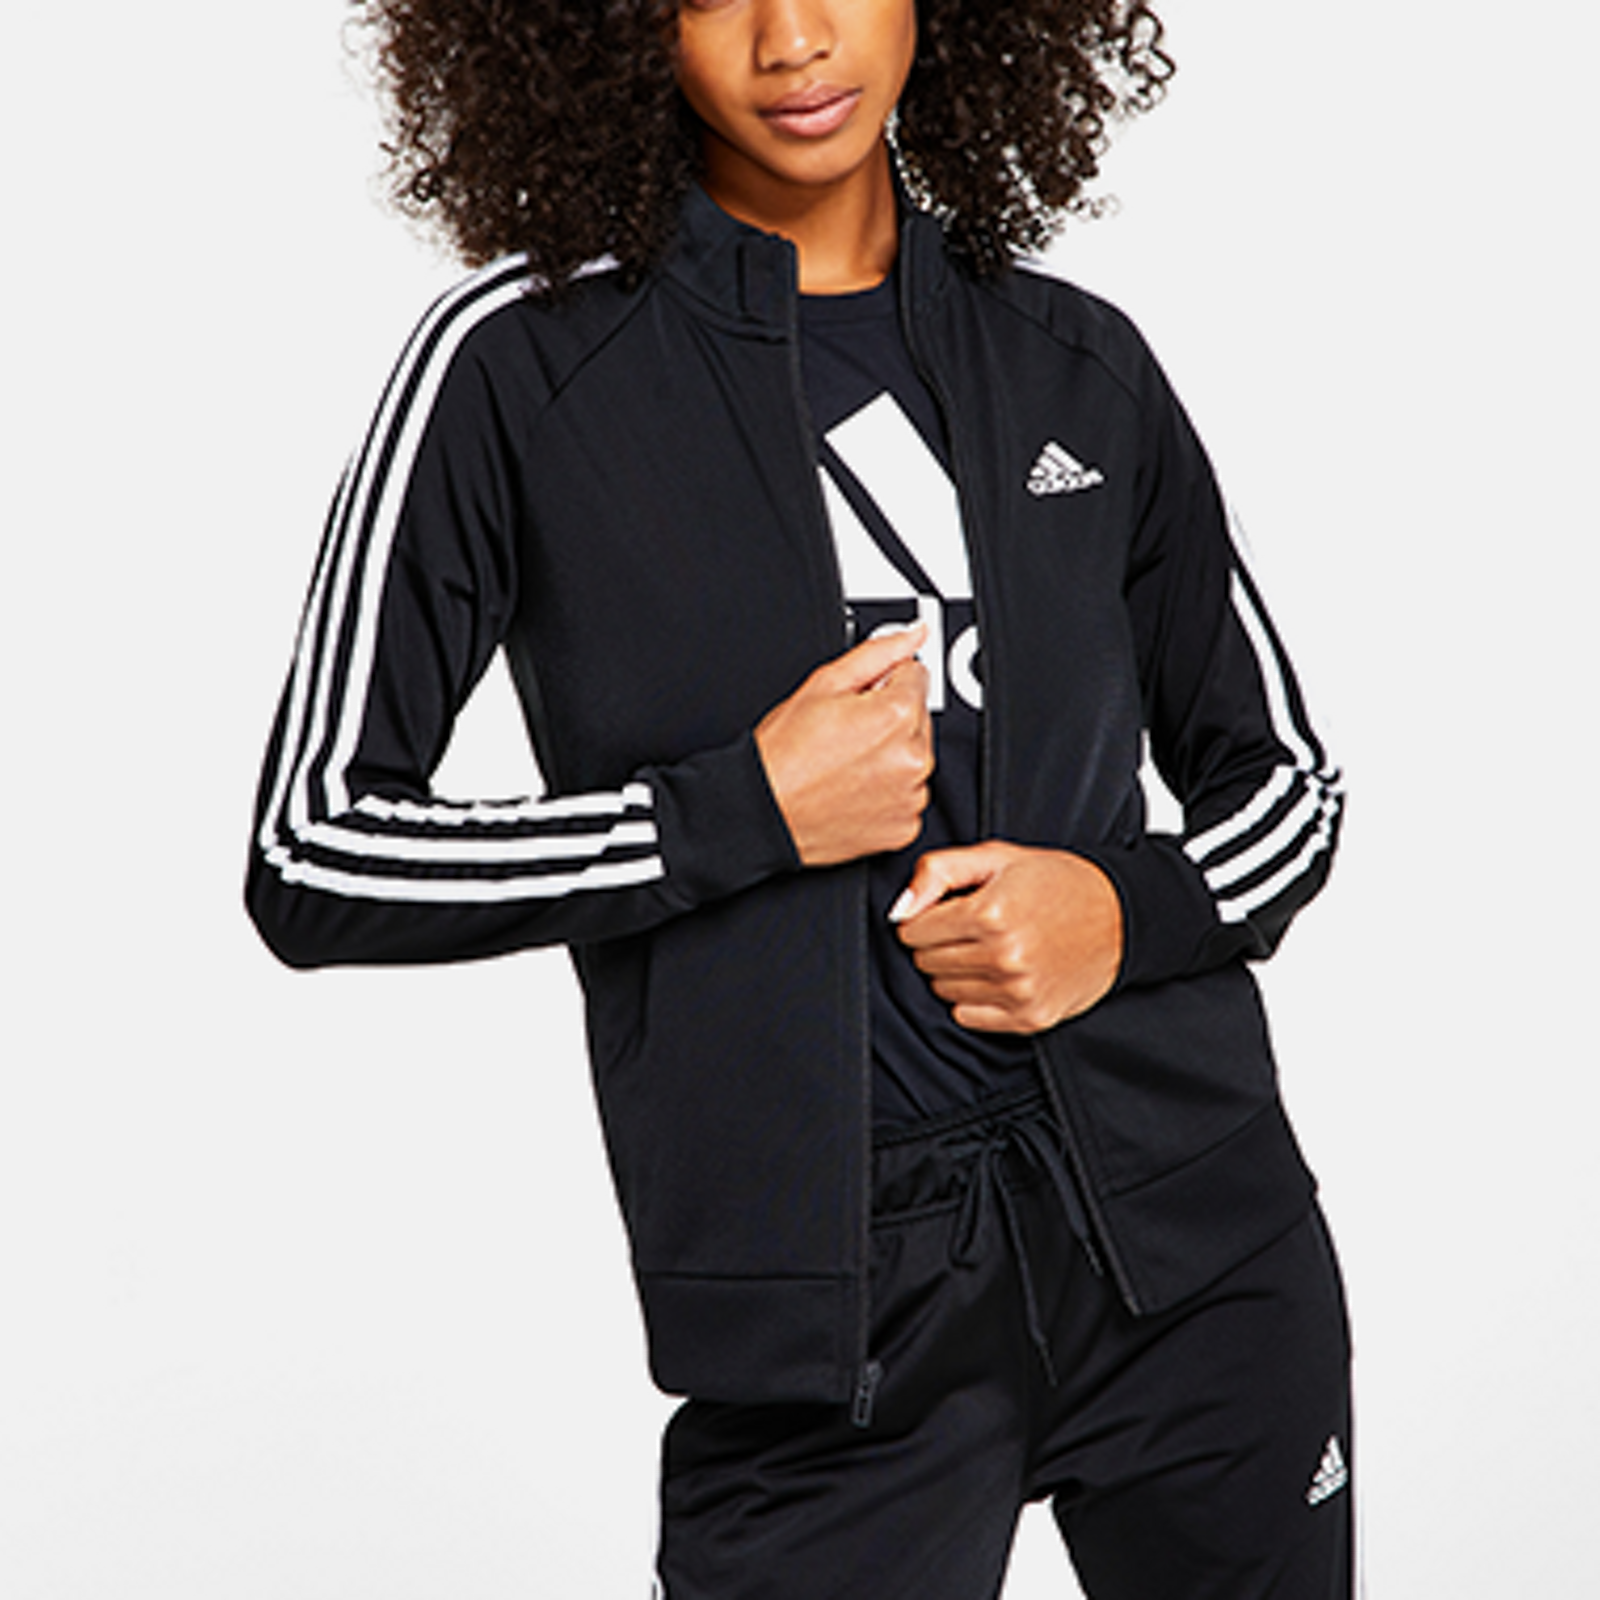 Jackets Workout Clothes: Women's Activewear & Athletic Wear - Macy's